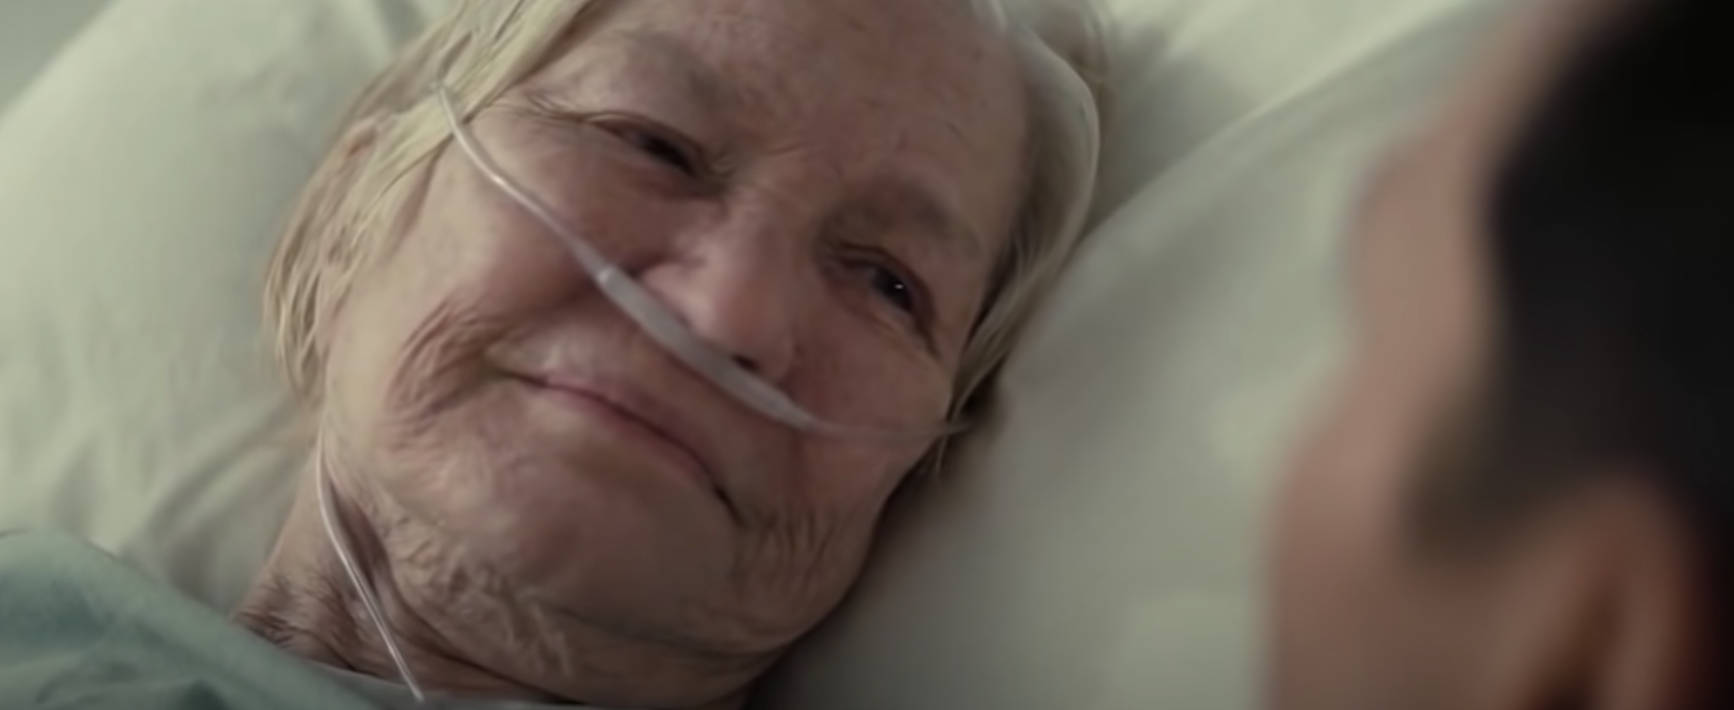 An older woman in a hospital bed